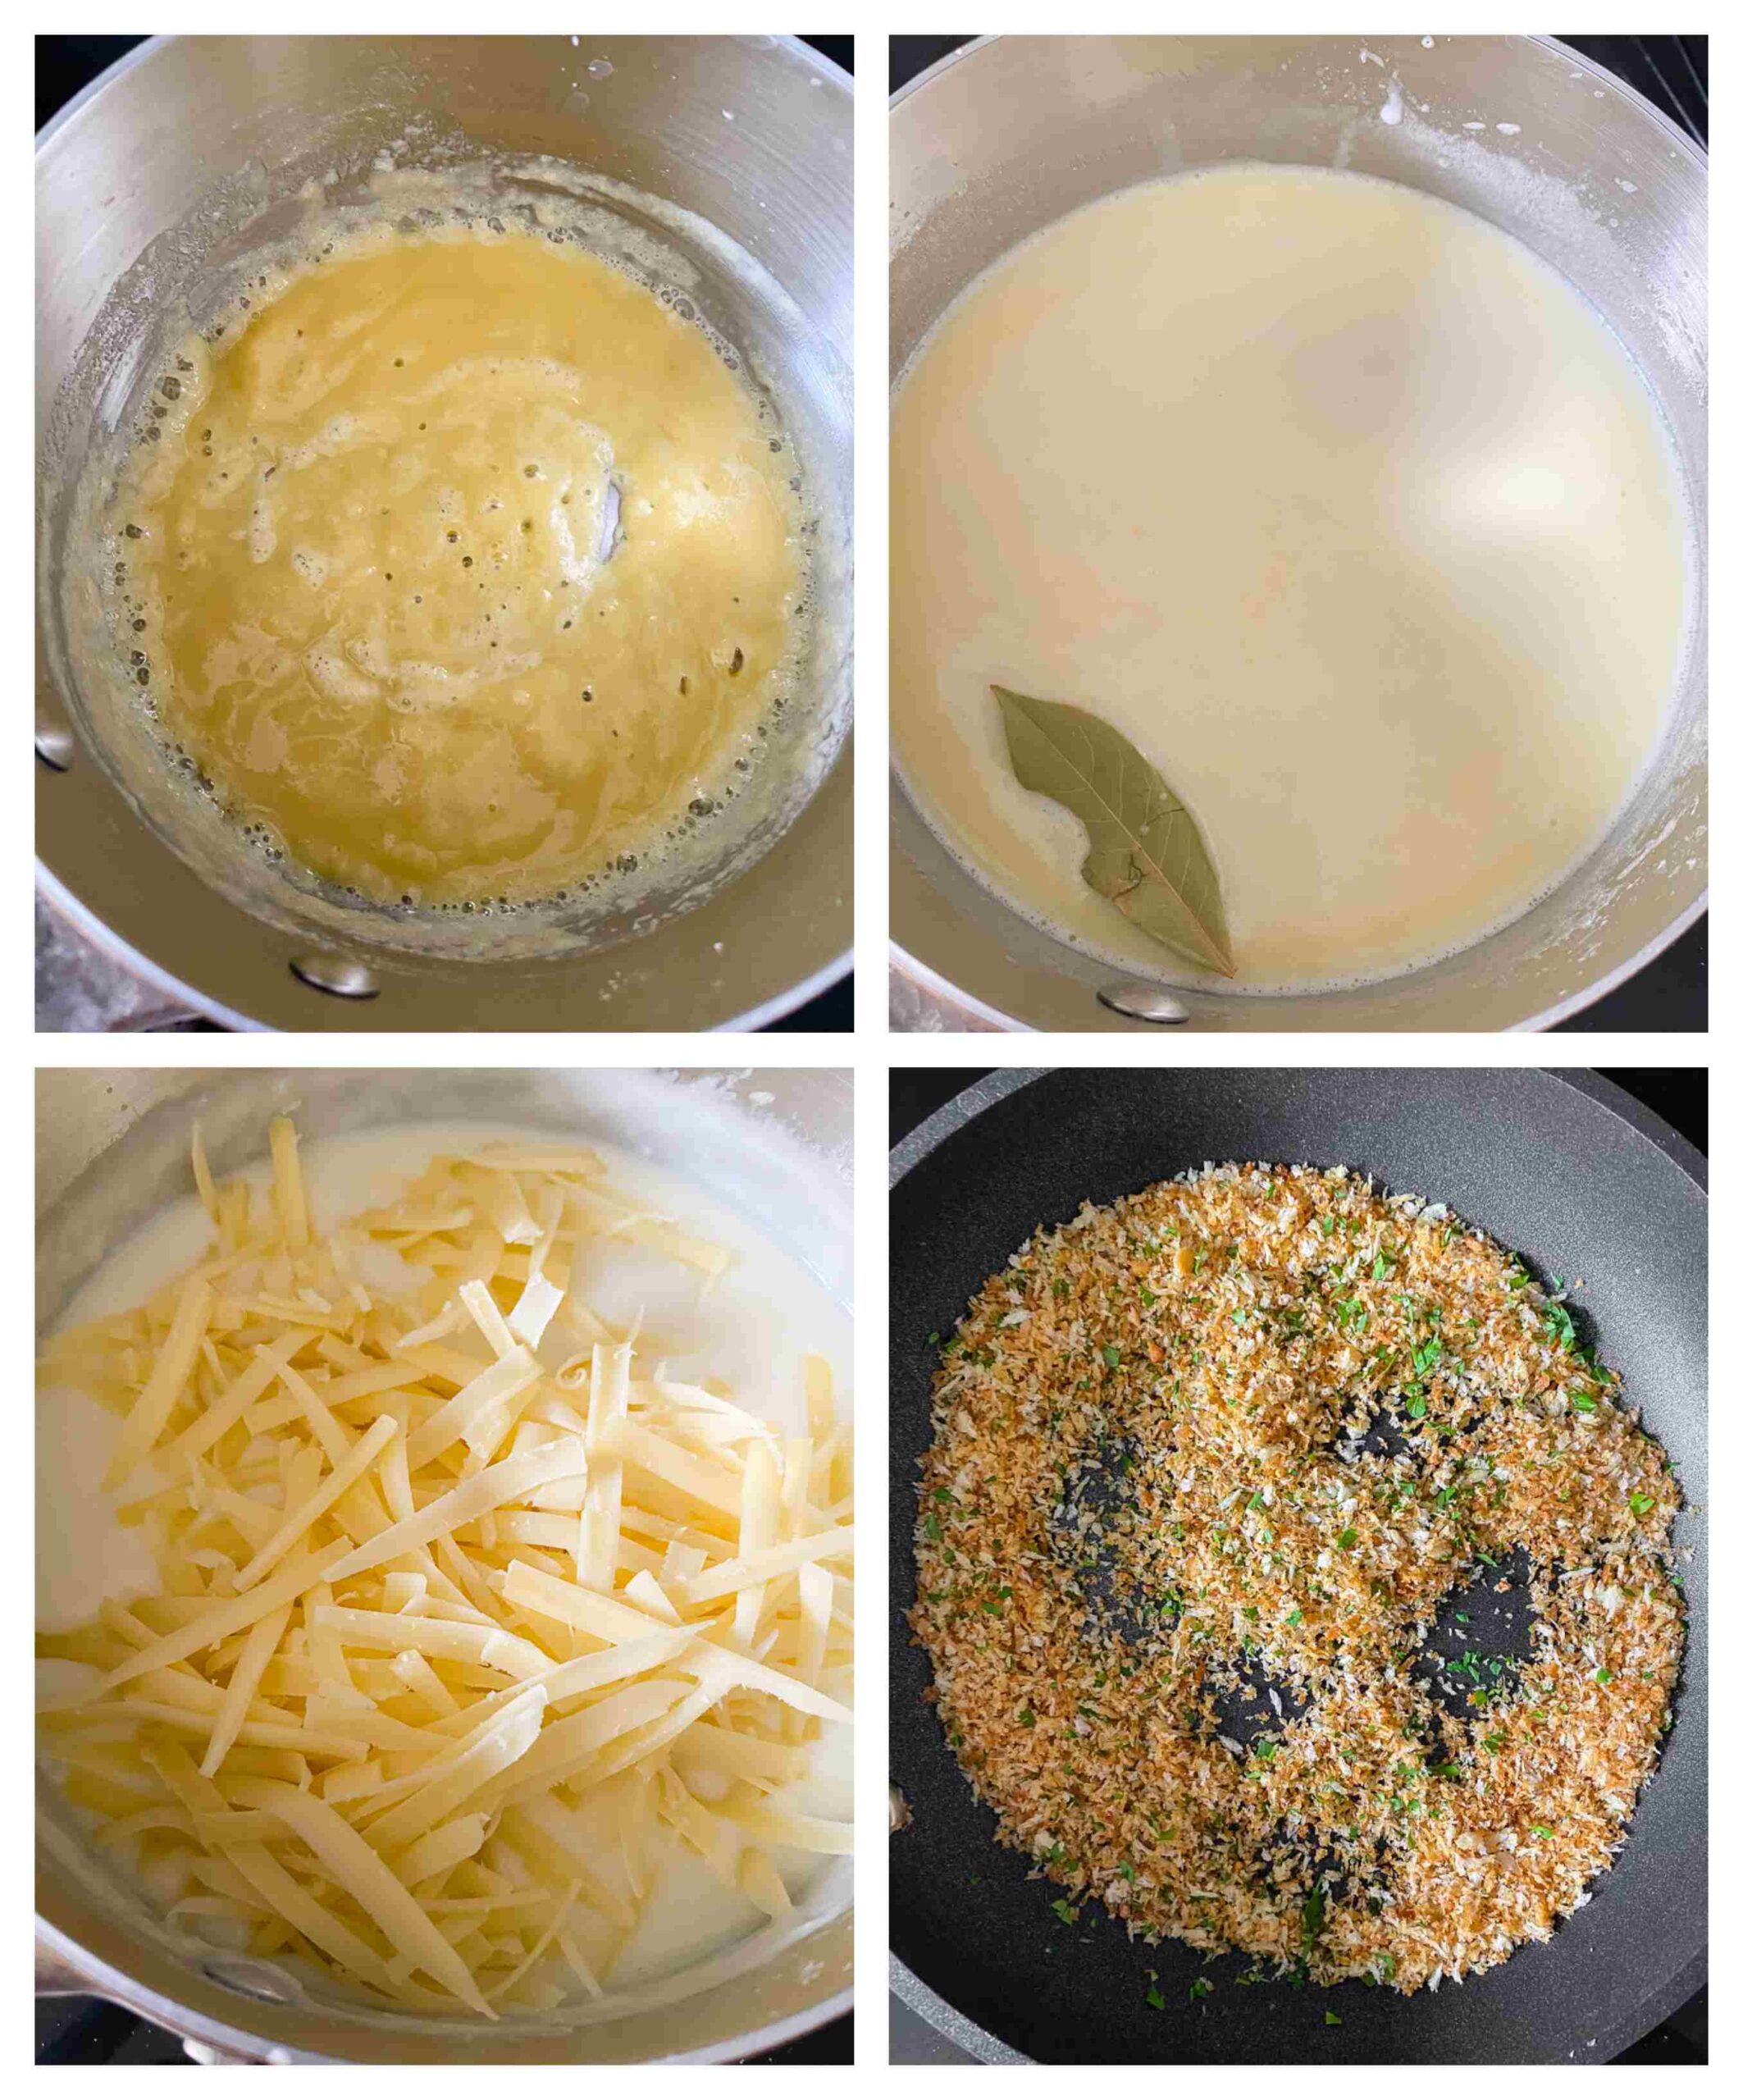 mornay sauce cooking process images